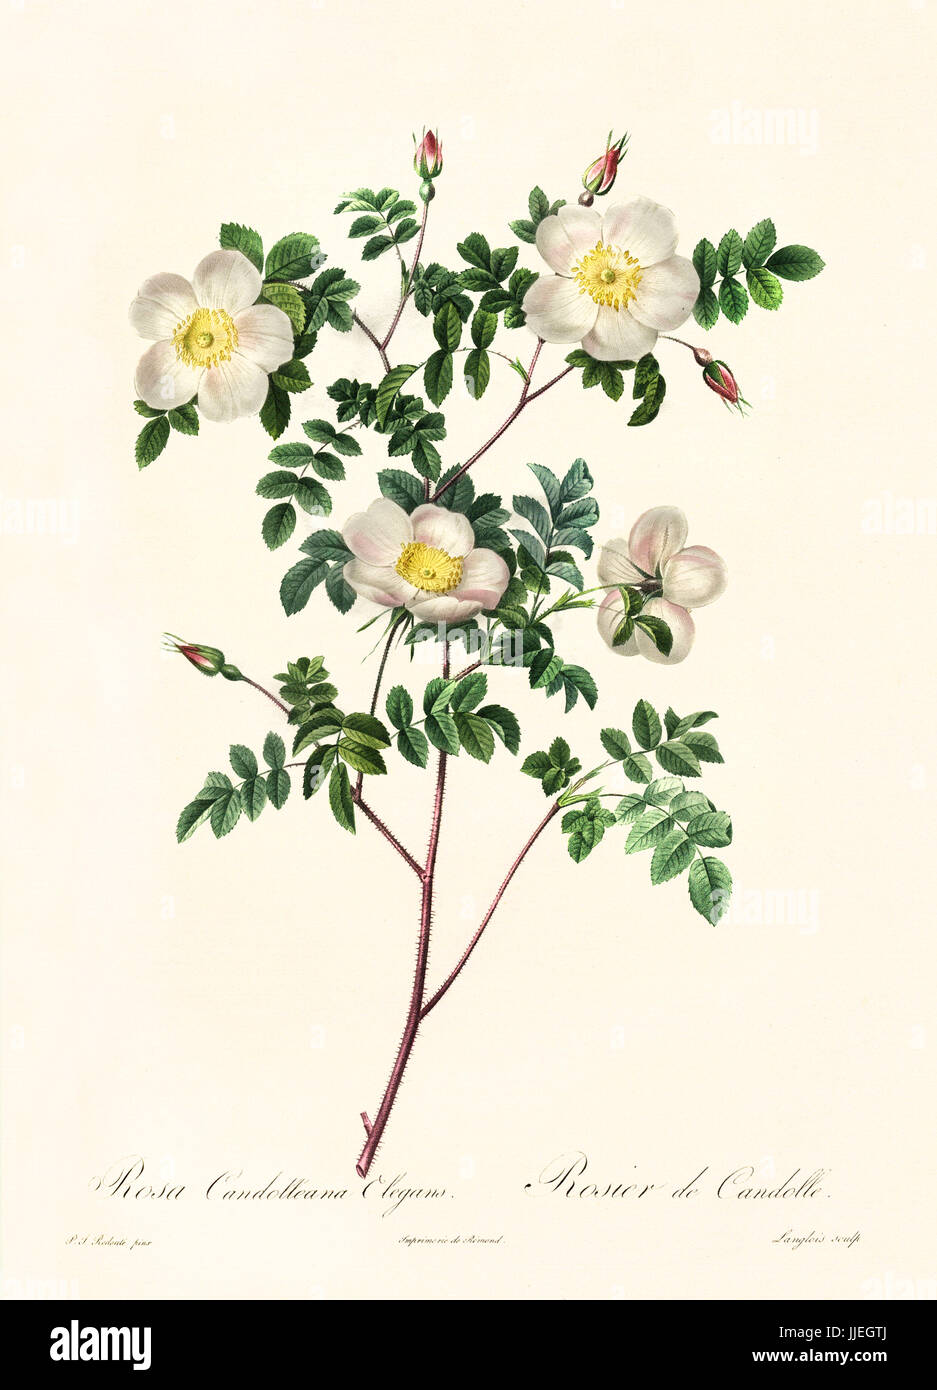 Old illustration of Rosa candolleana elegans. Created by P. R. Redoute, published on Les Roses, Imp. Firmin Didot, Paris, 1817-24 Stock Photo